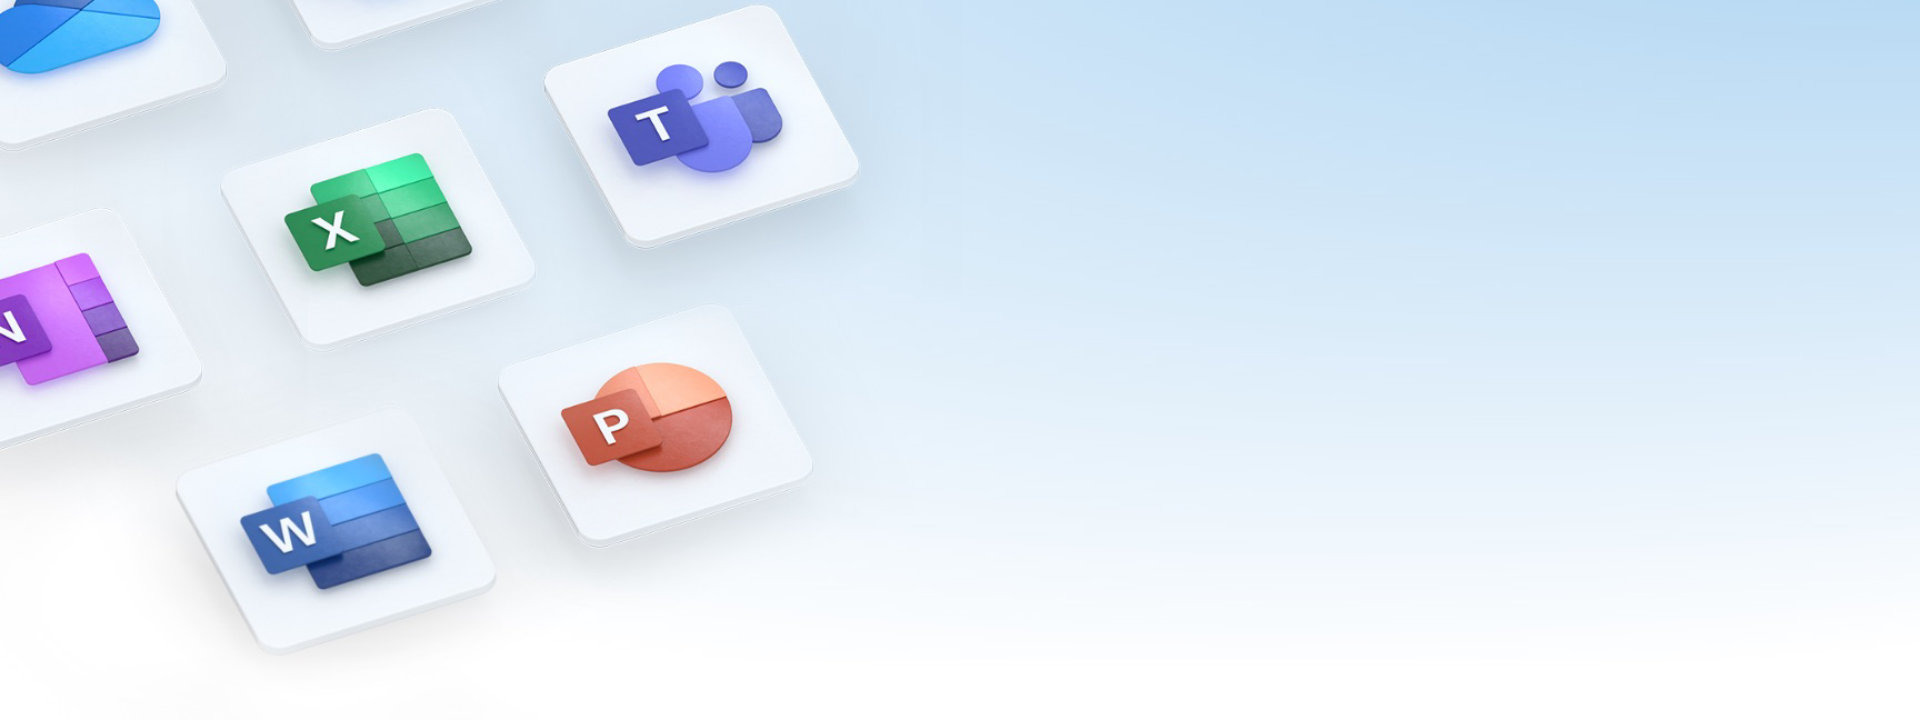 Microsoft product icons cascading from top left hand corner with a blue and white background